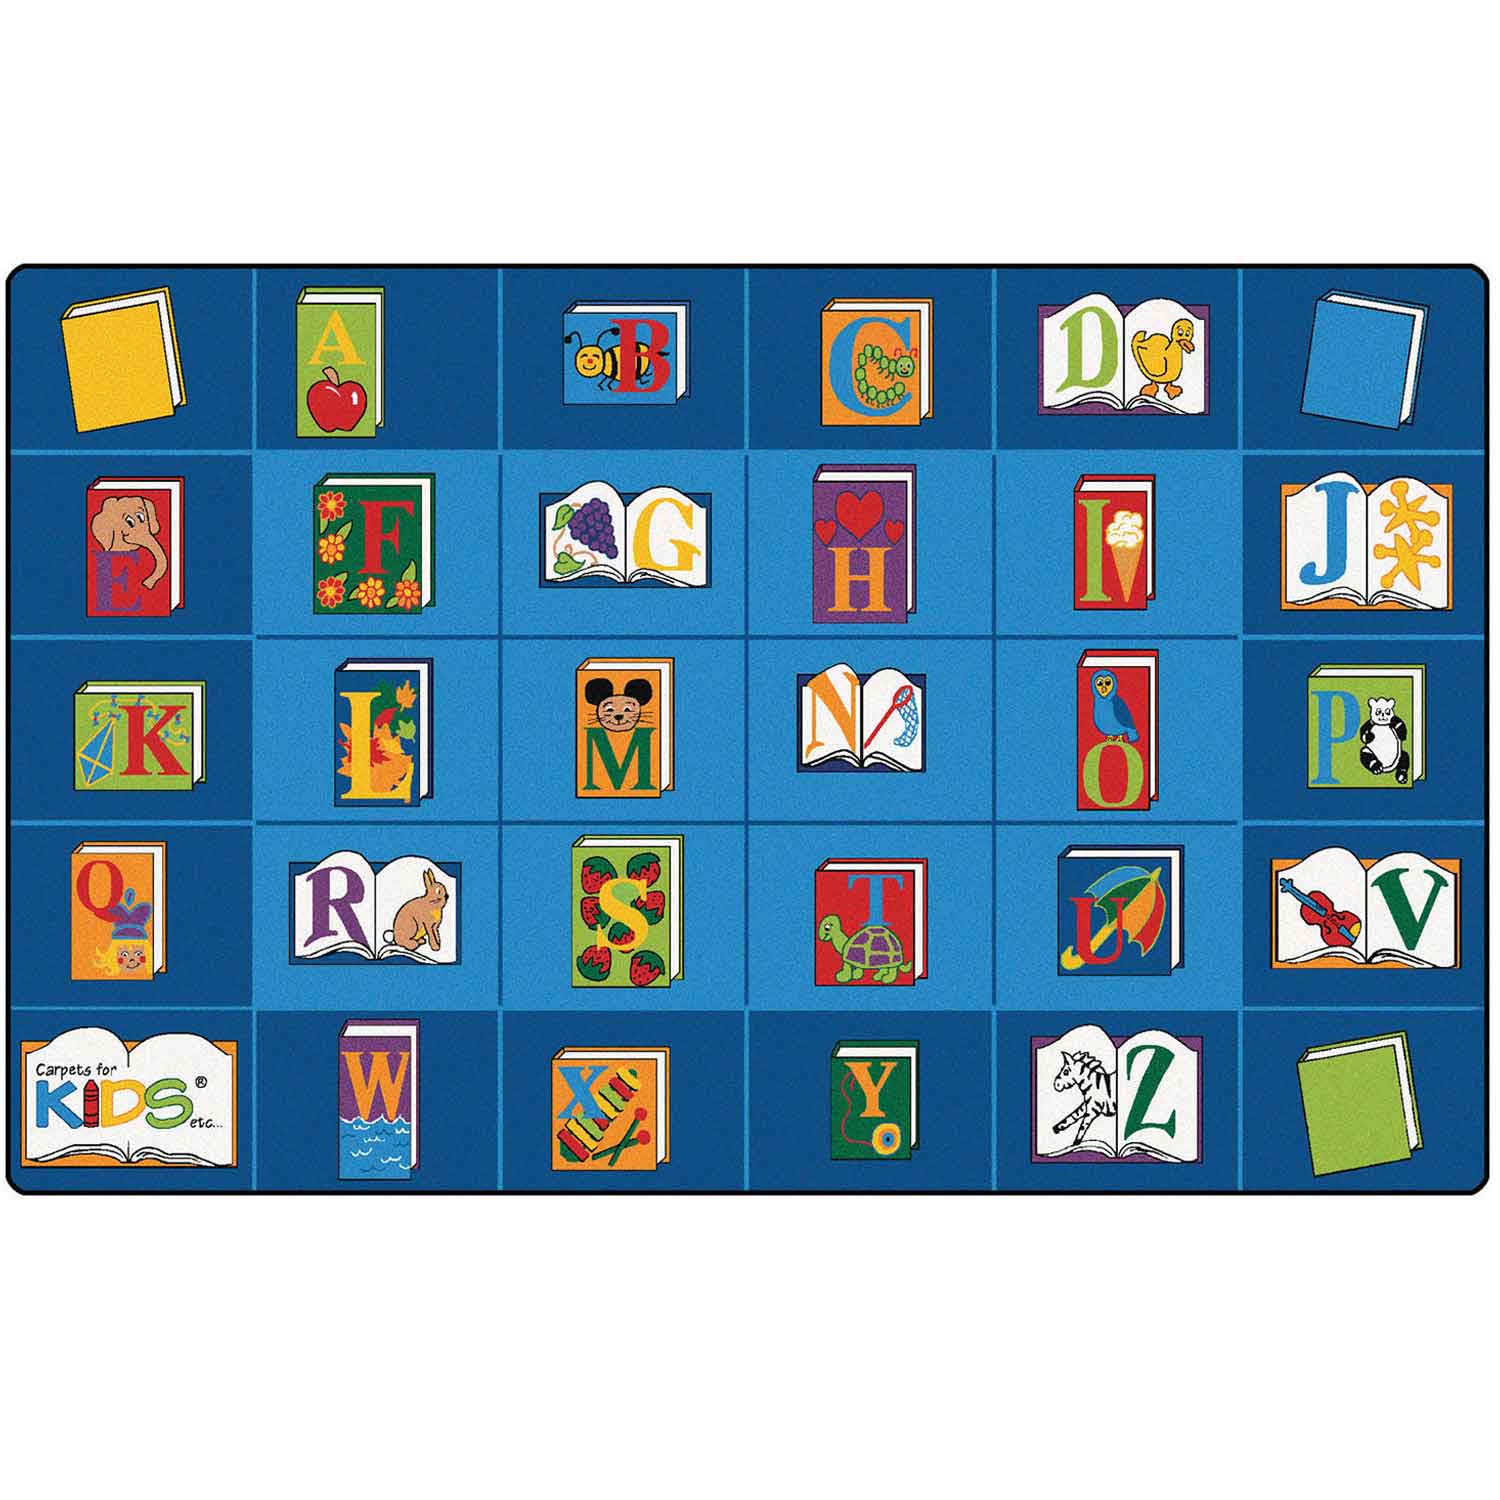 Reading By The Book Seating Classroom Rug, Rectangle 8'4" x 13'4"